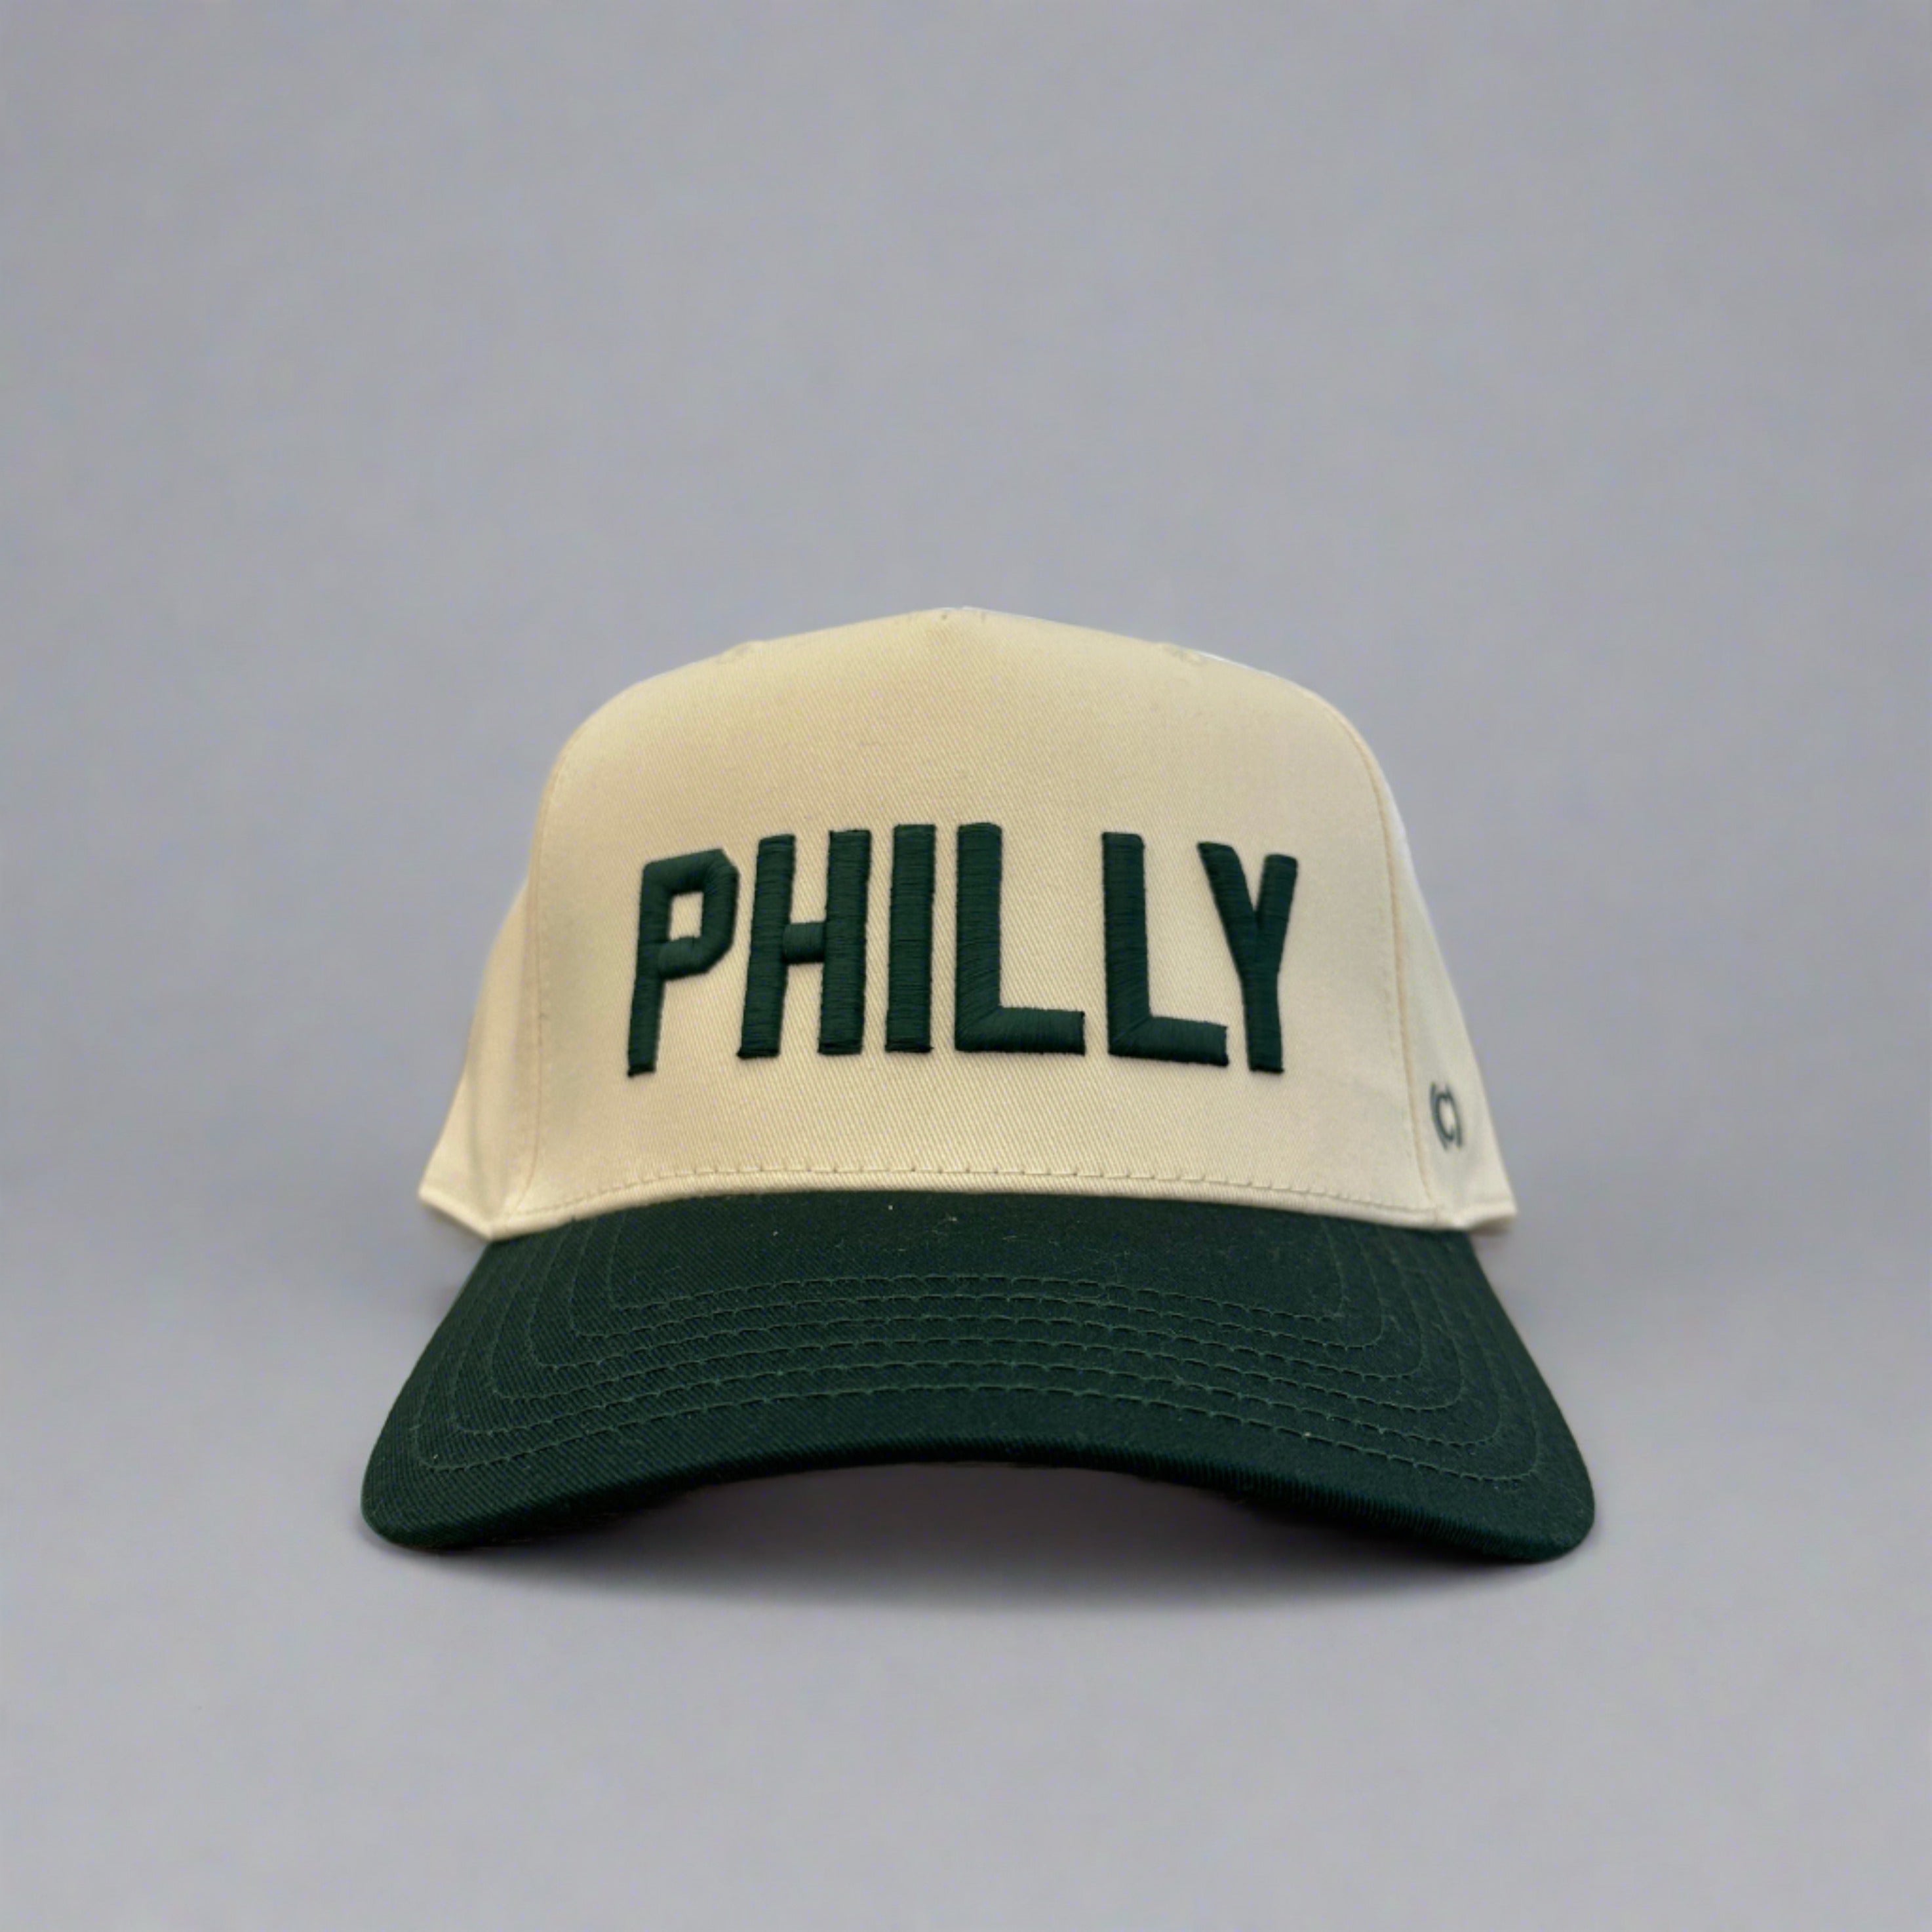 Philly Vintage Two-Tone Cream & Green Snapback